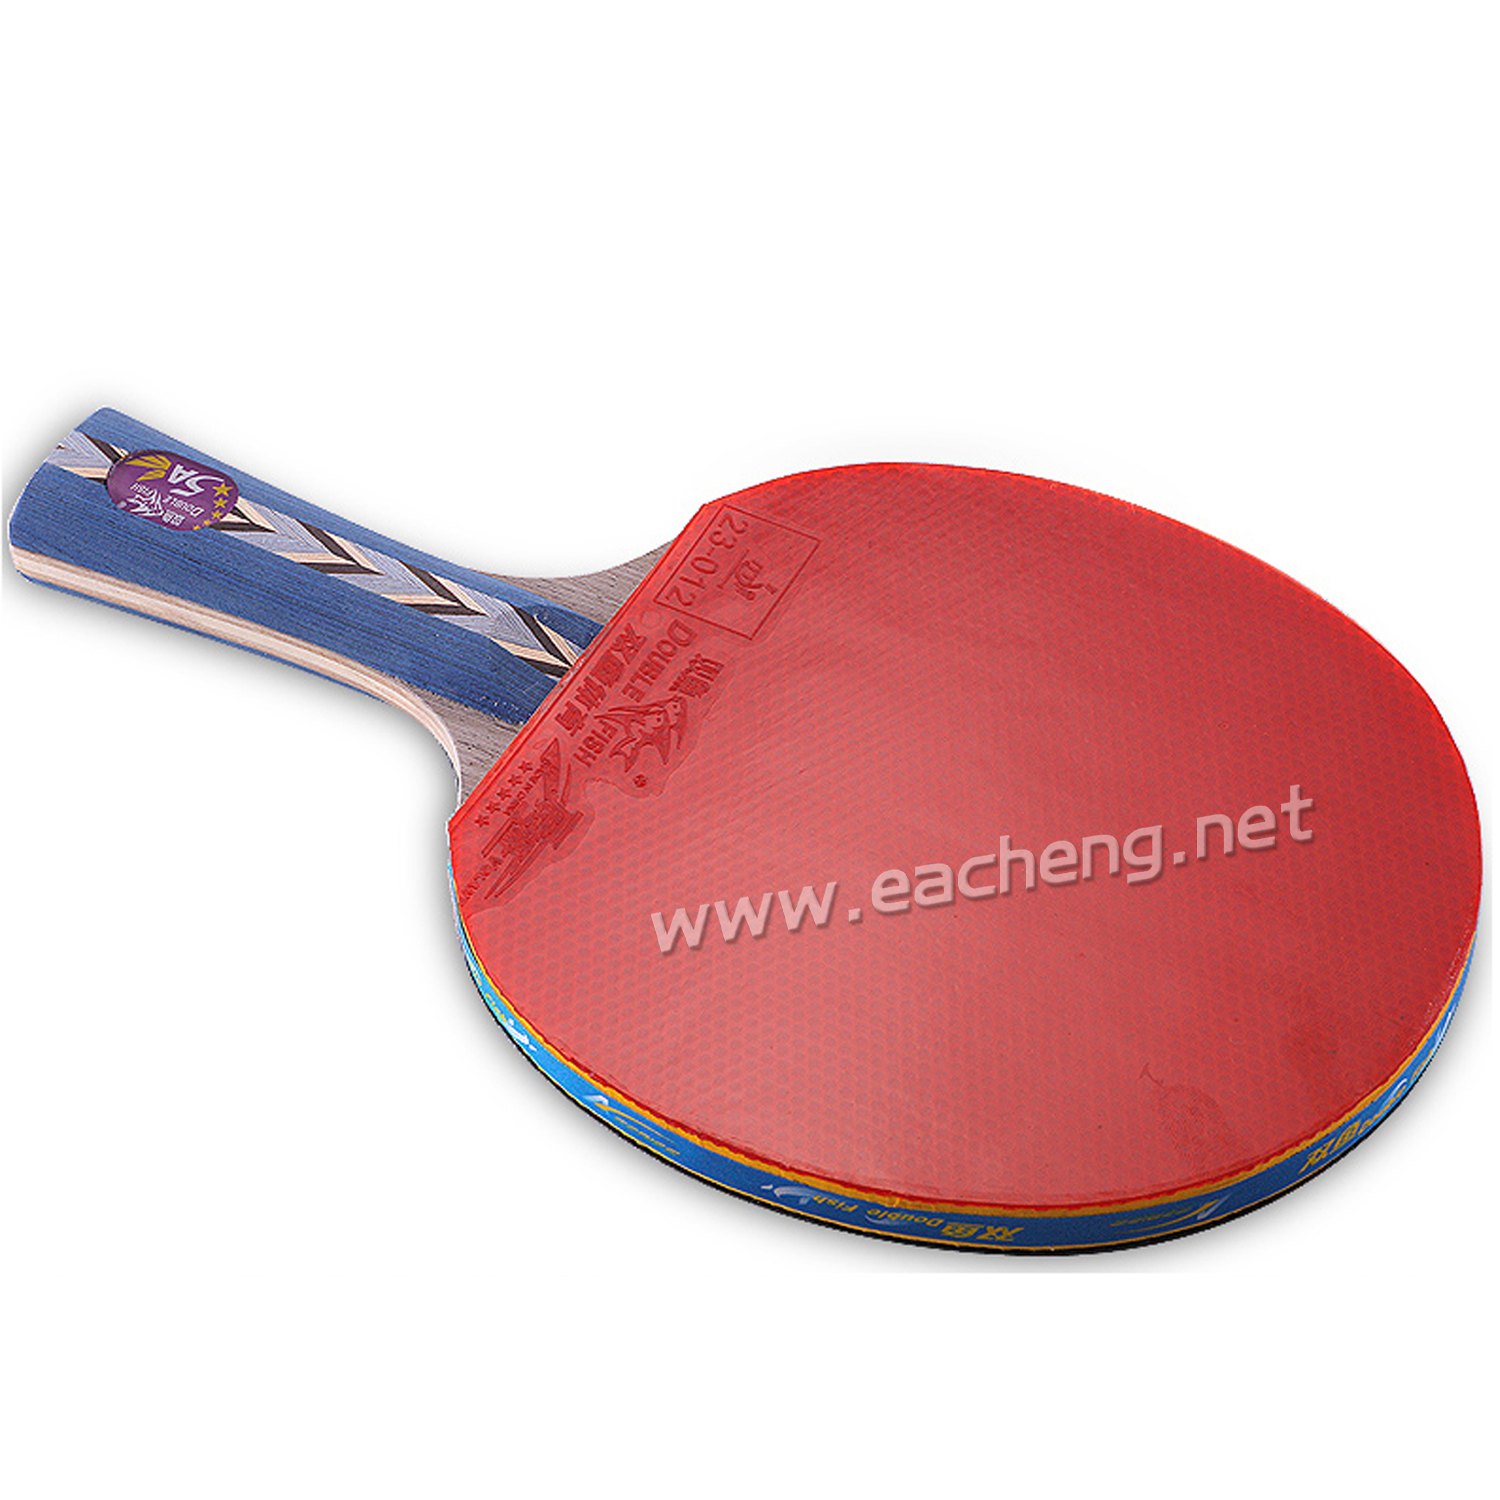 Double Fish 5A-C Ping Pong Paddle for Advanced Training Table Tennis Racket with 5-Ply Wood High Elasticity Rubber Design for Spin 